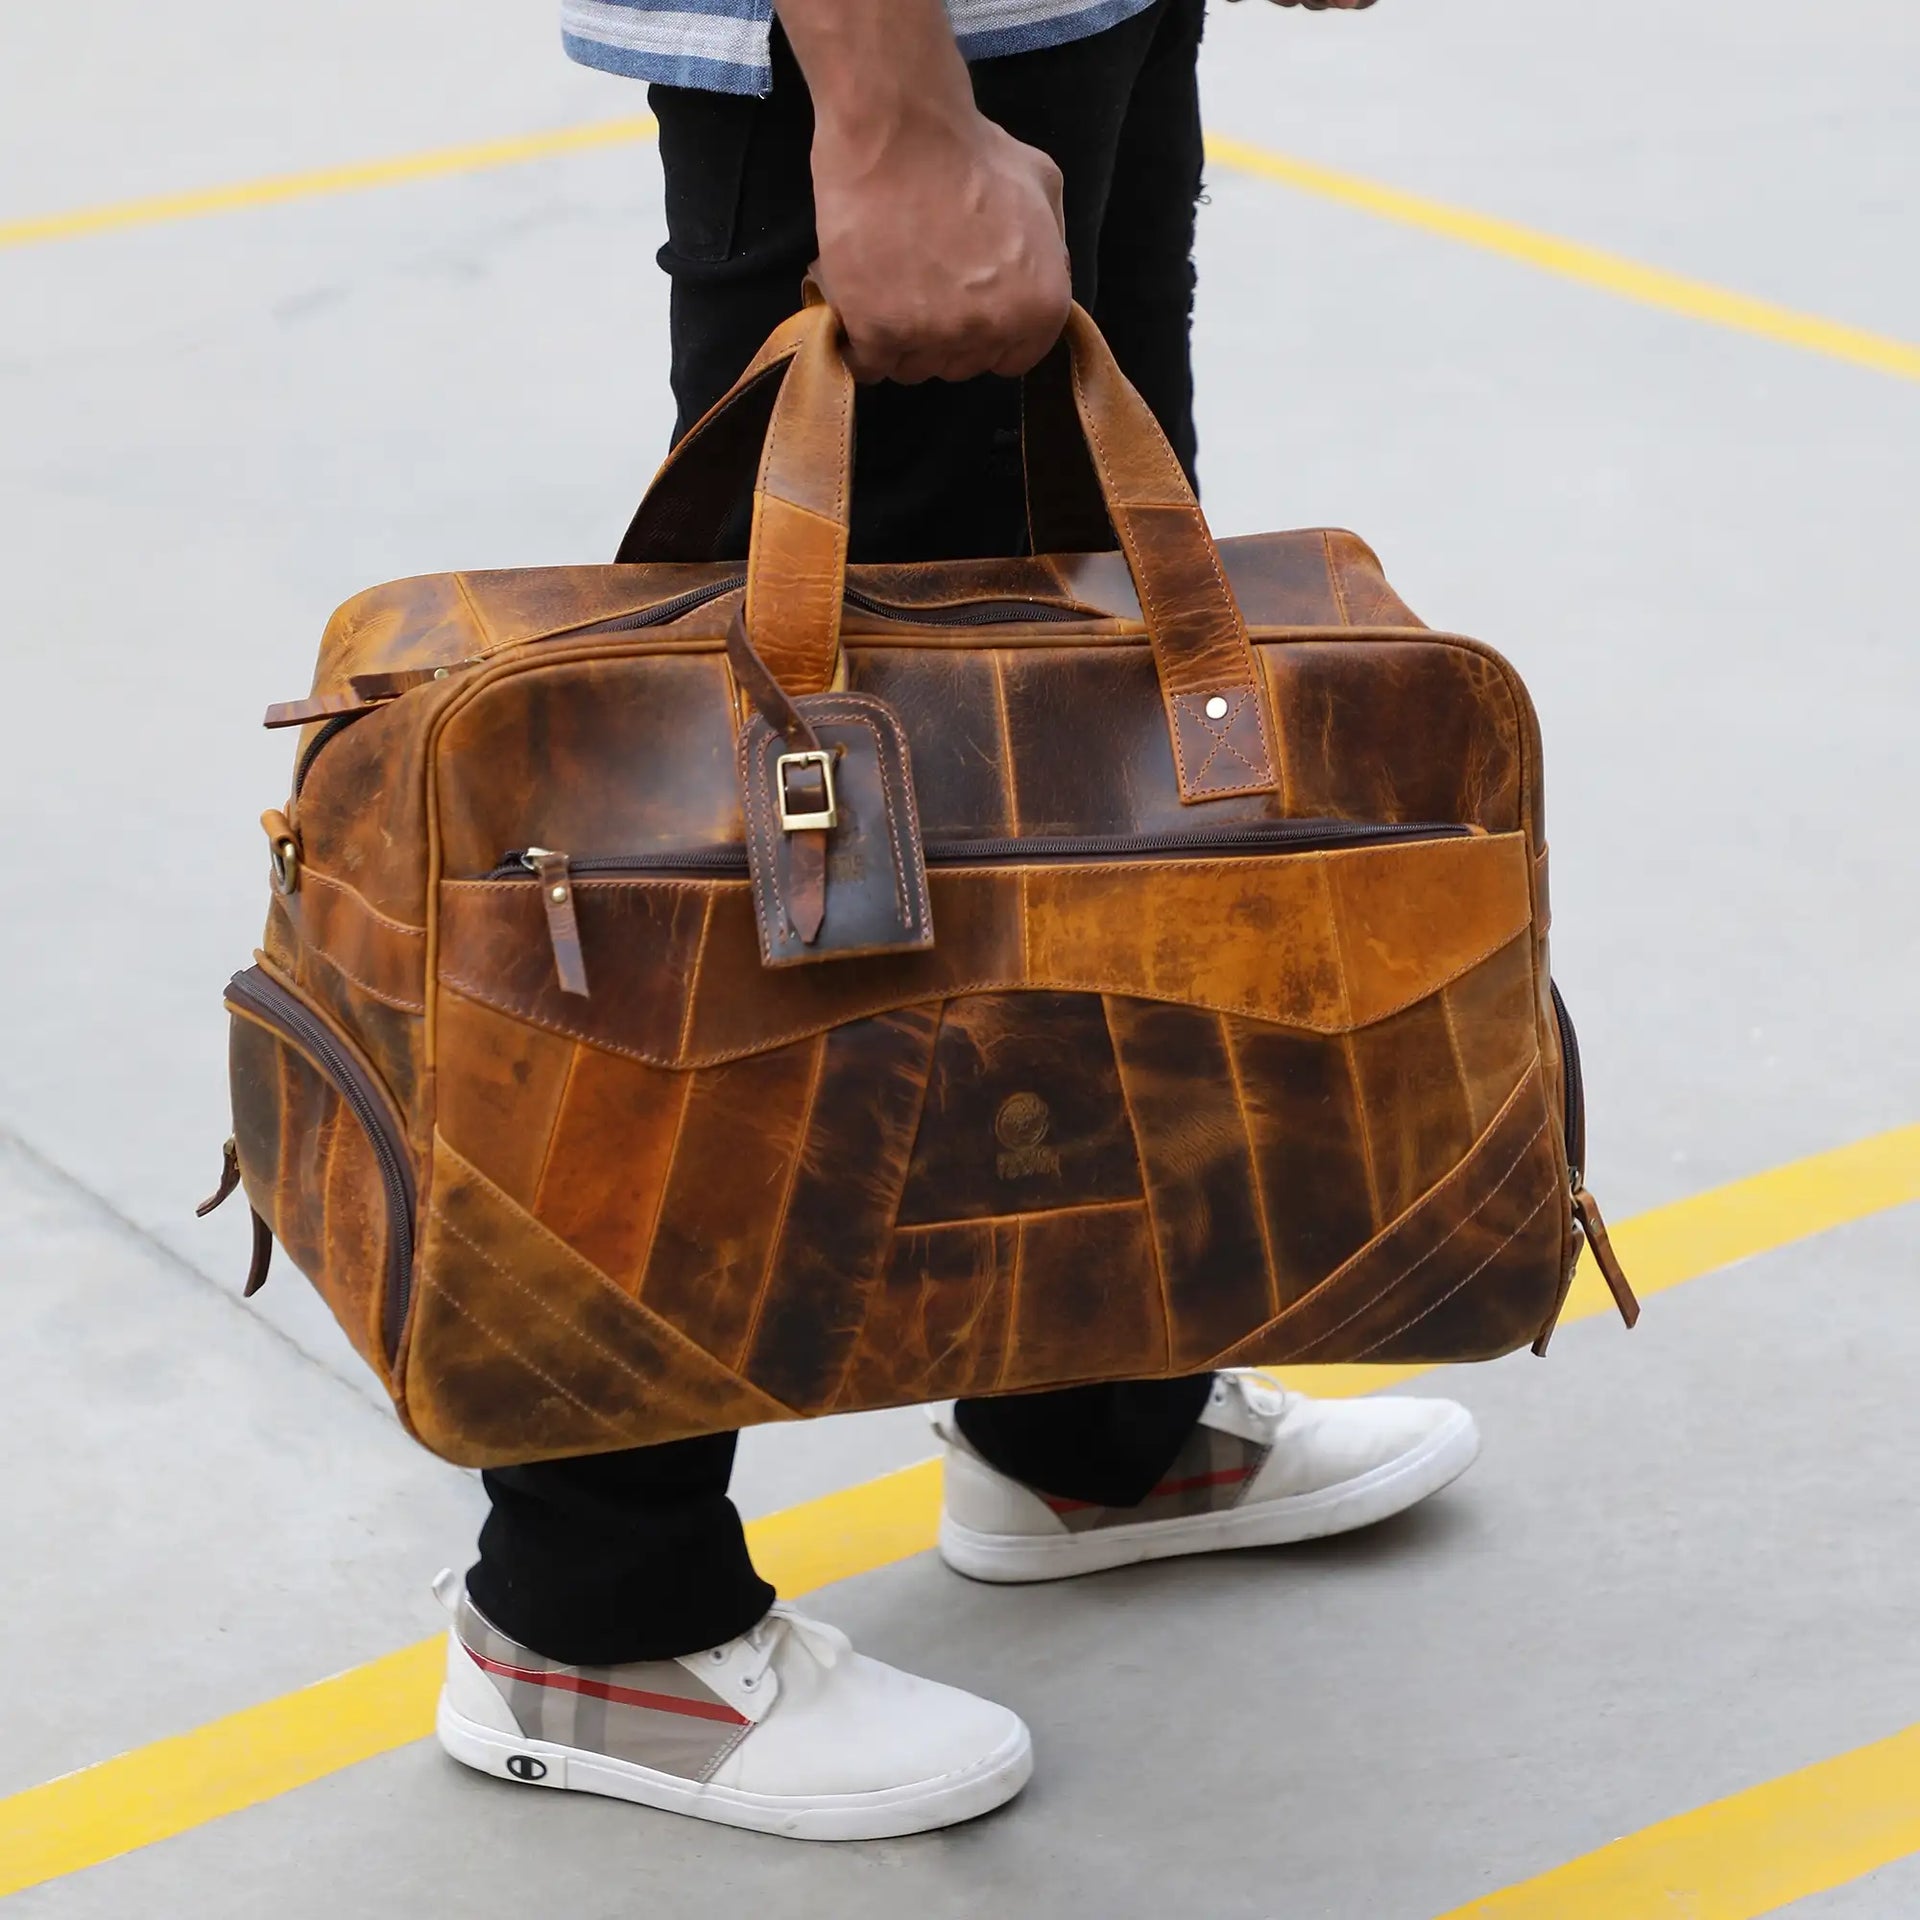 Full Grain Leather Duffle Bag  Vintage Leather Duffle Bag by Rustico